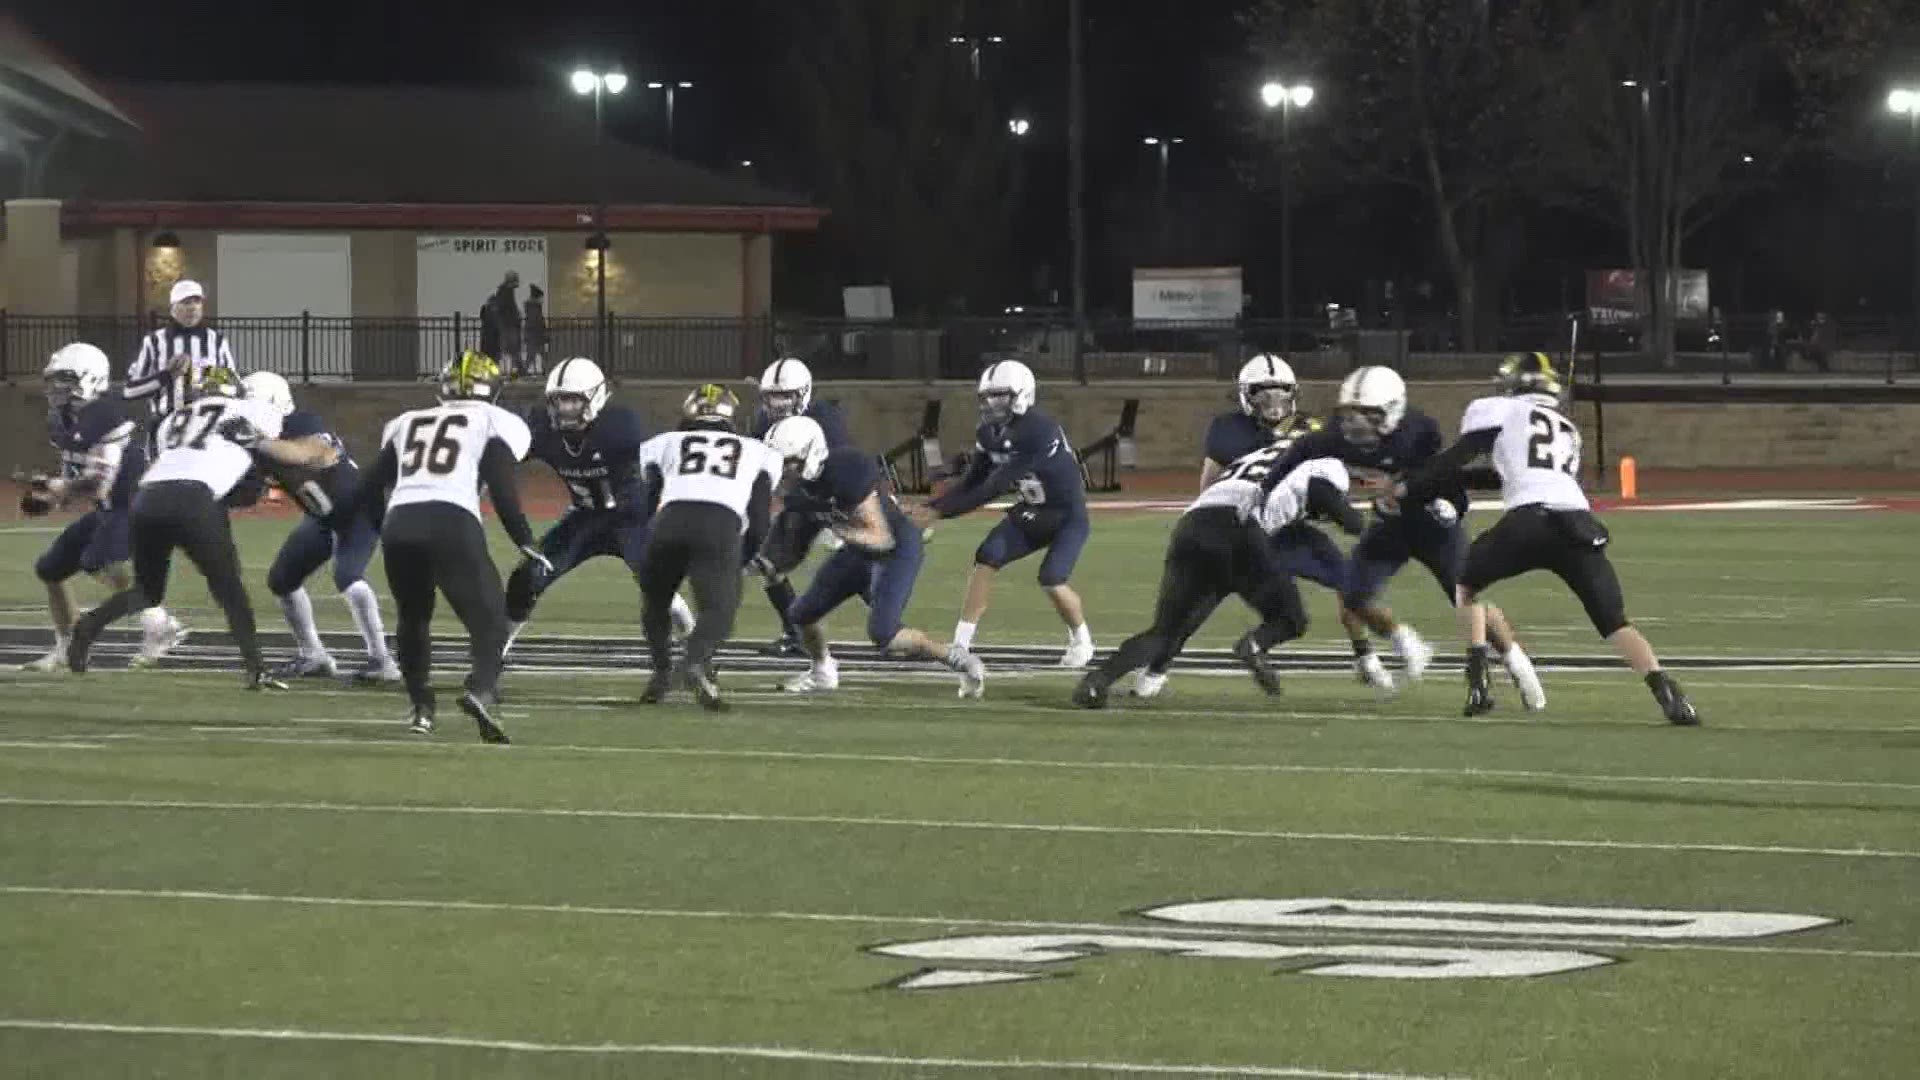 Highlights from South Christian vs. Unity Christian